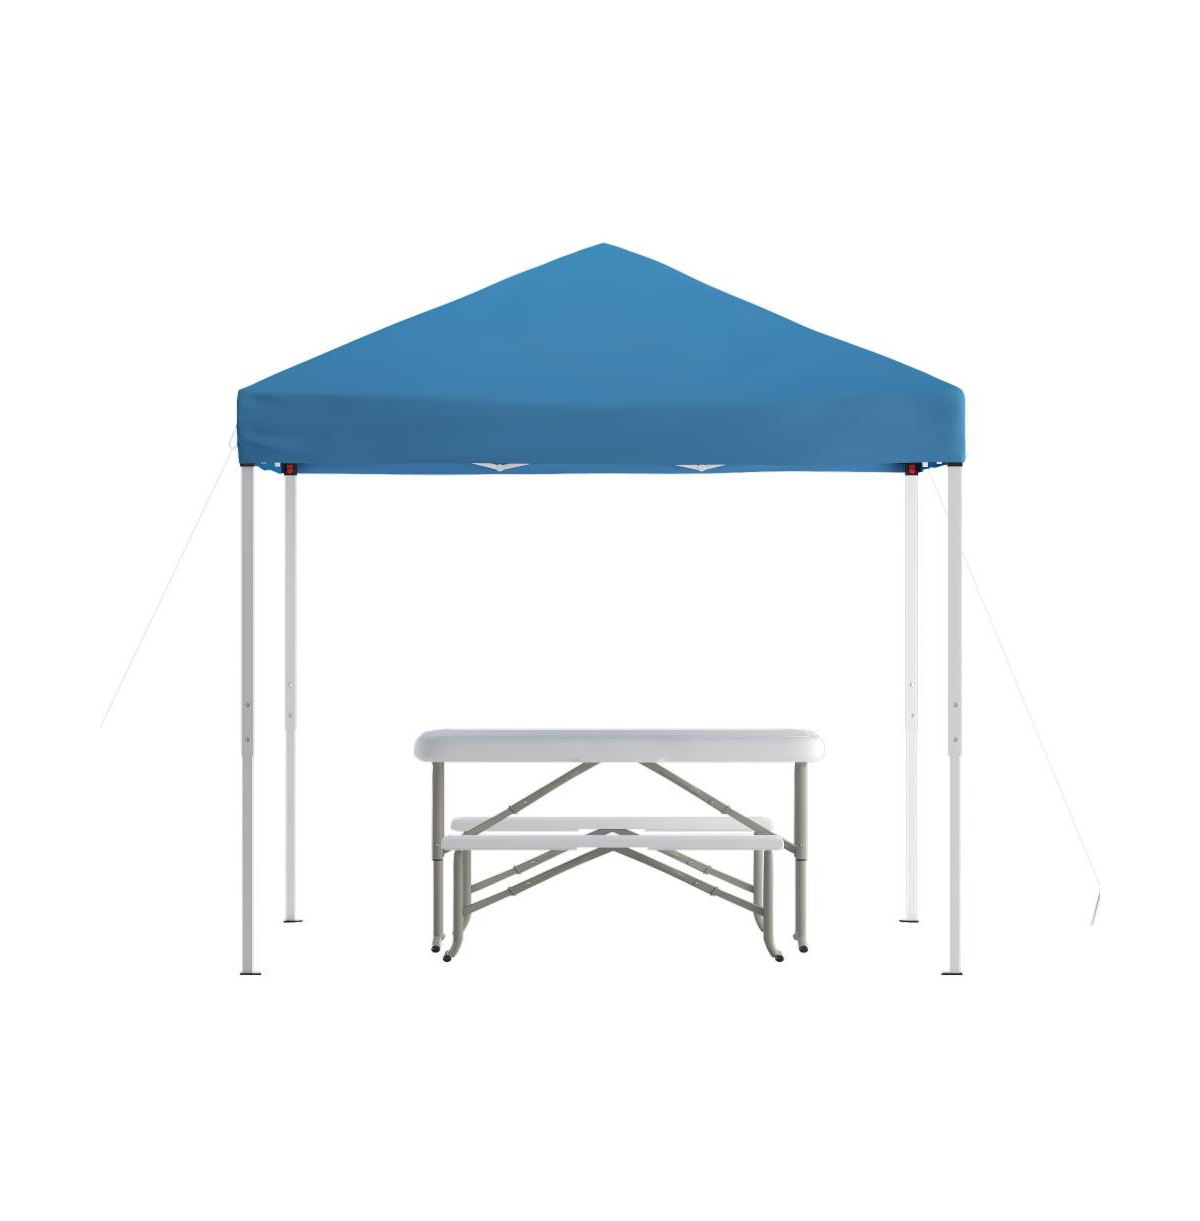 Portable Tailgate, Camping Or Event Set With White Pop Up Event Canopy Tent With Carry Bag And Folding Table With Benches Set - White